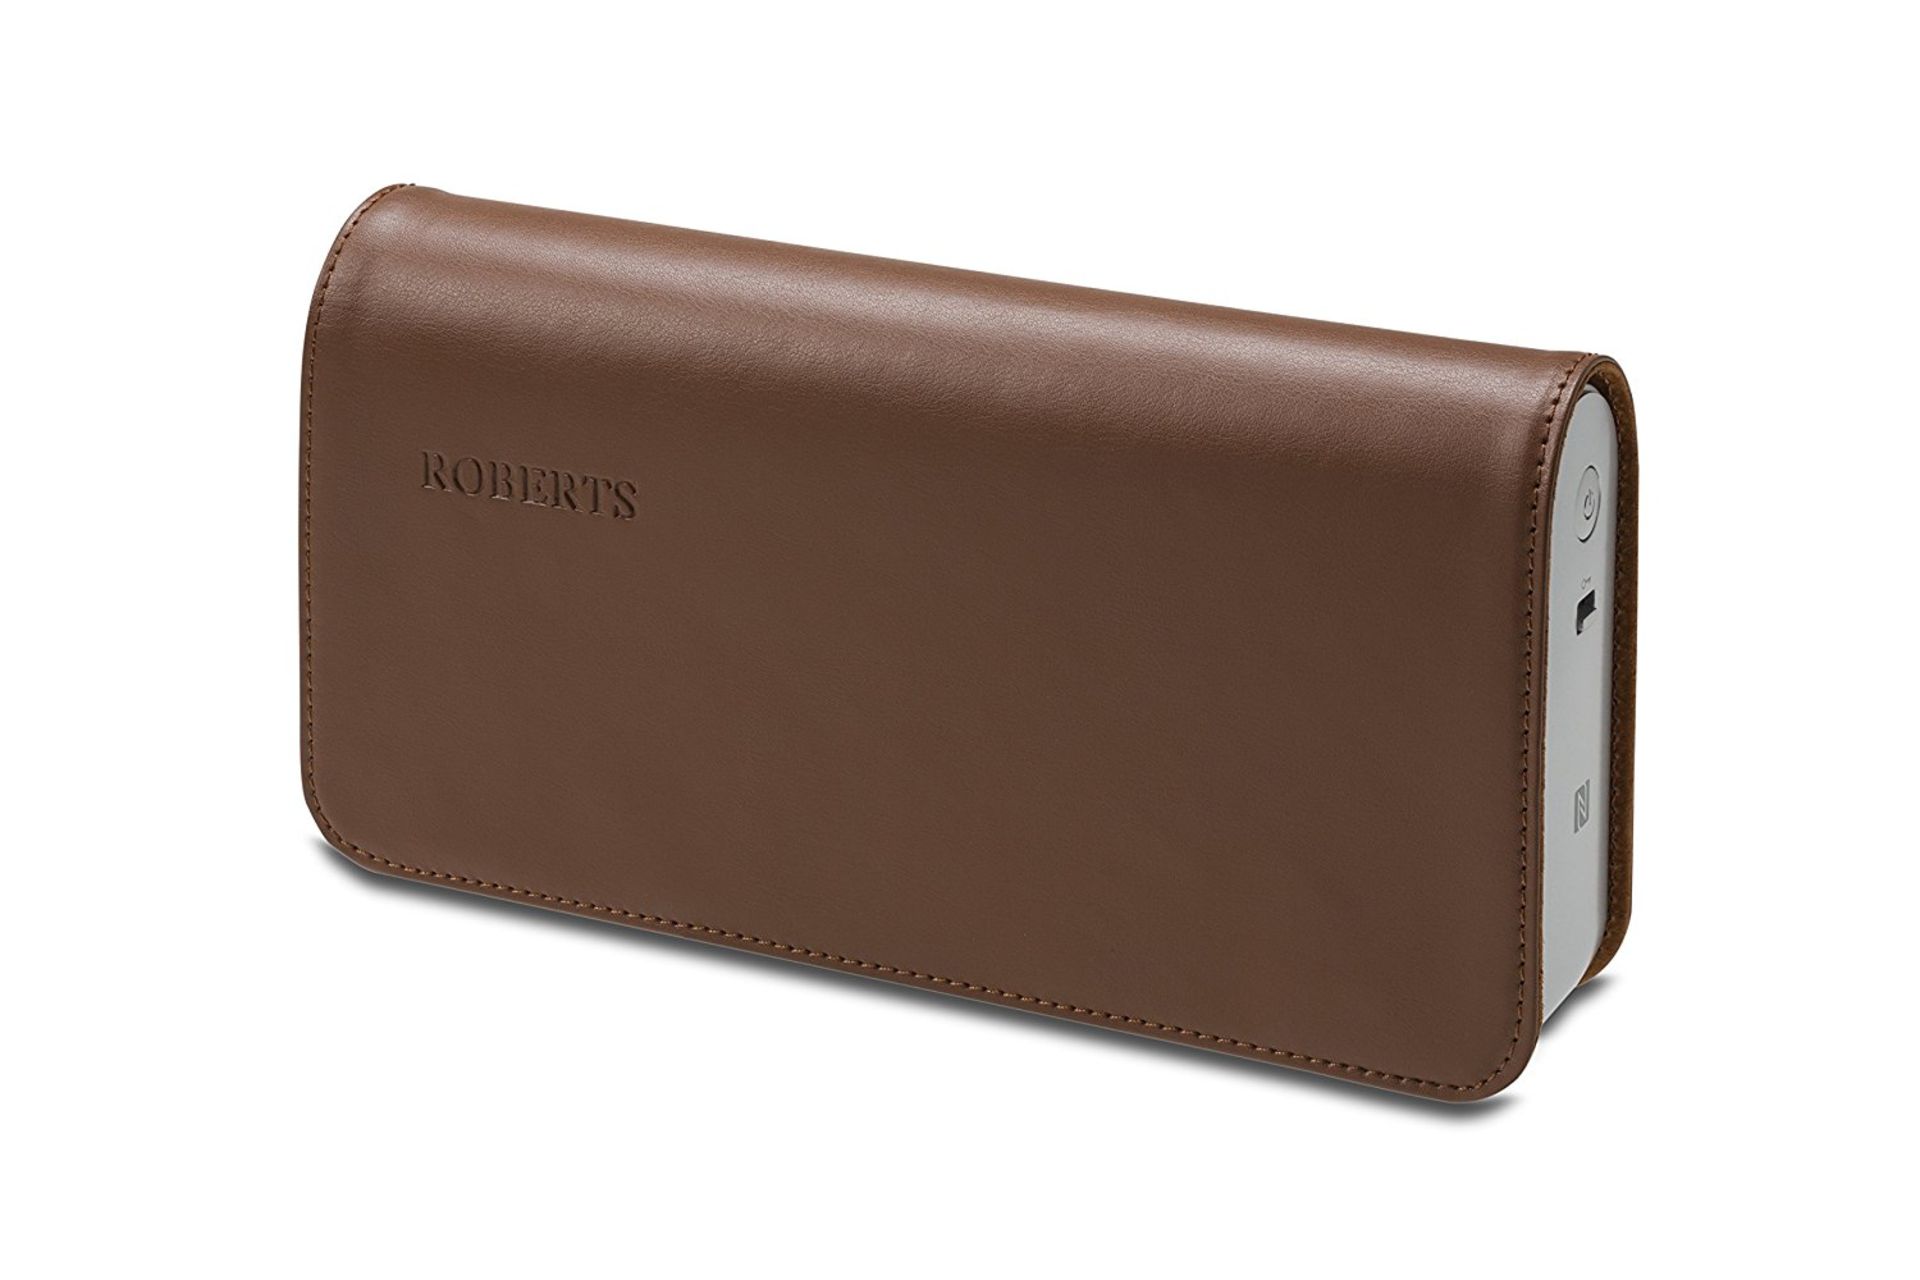 V Grade A Roberts BluPad Radio Portable Speaker With Built In Rechargable Battery And Leather - Image 2 of 4